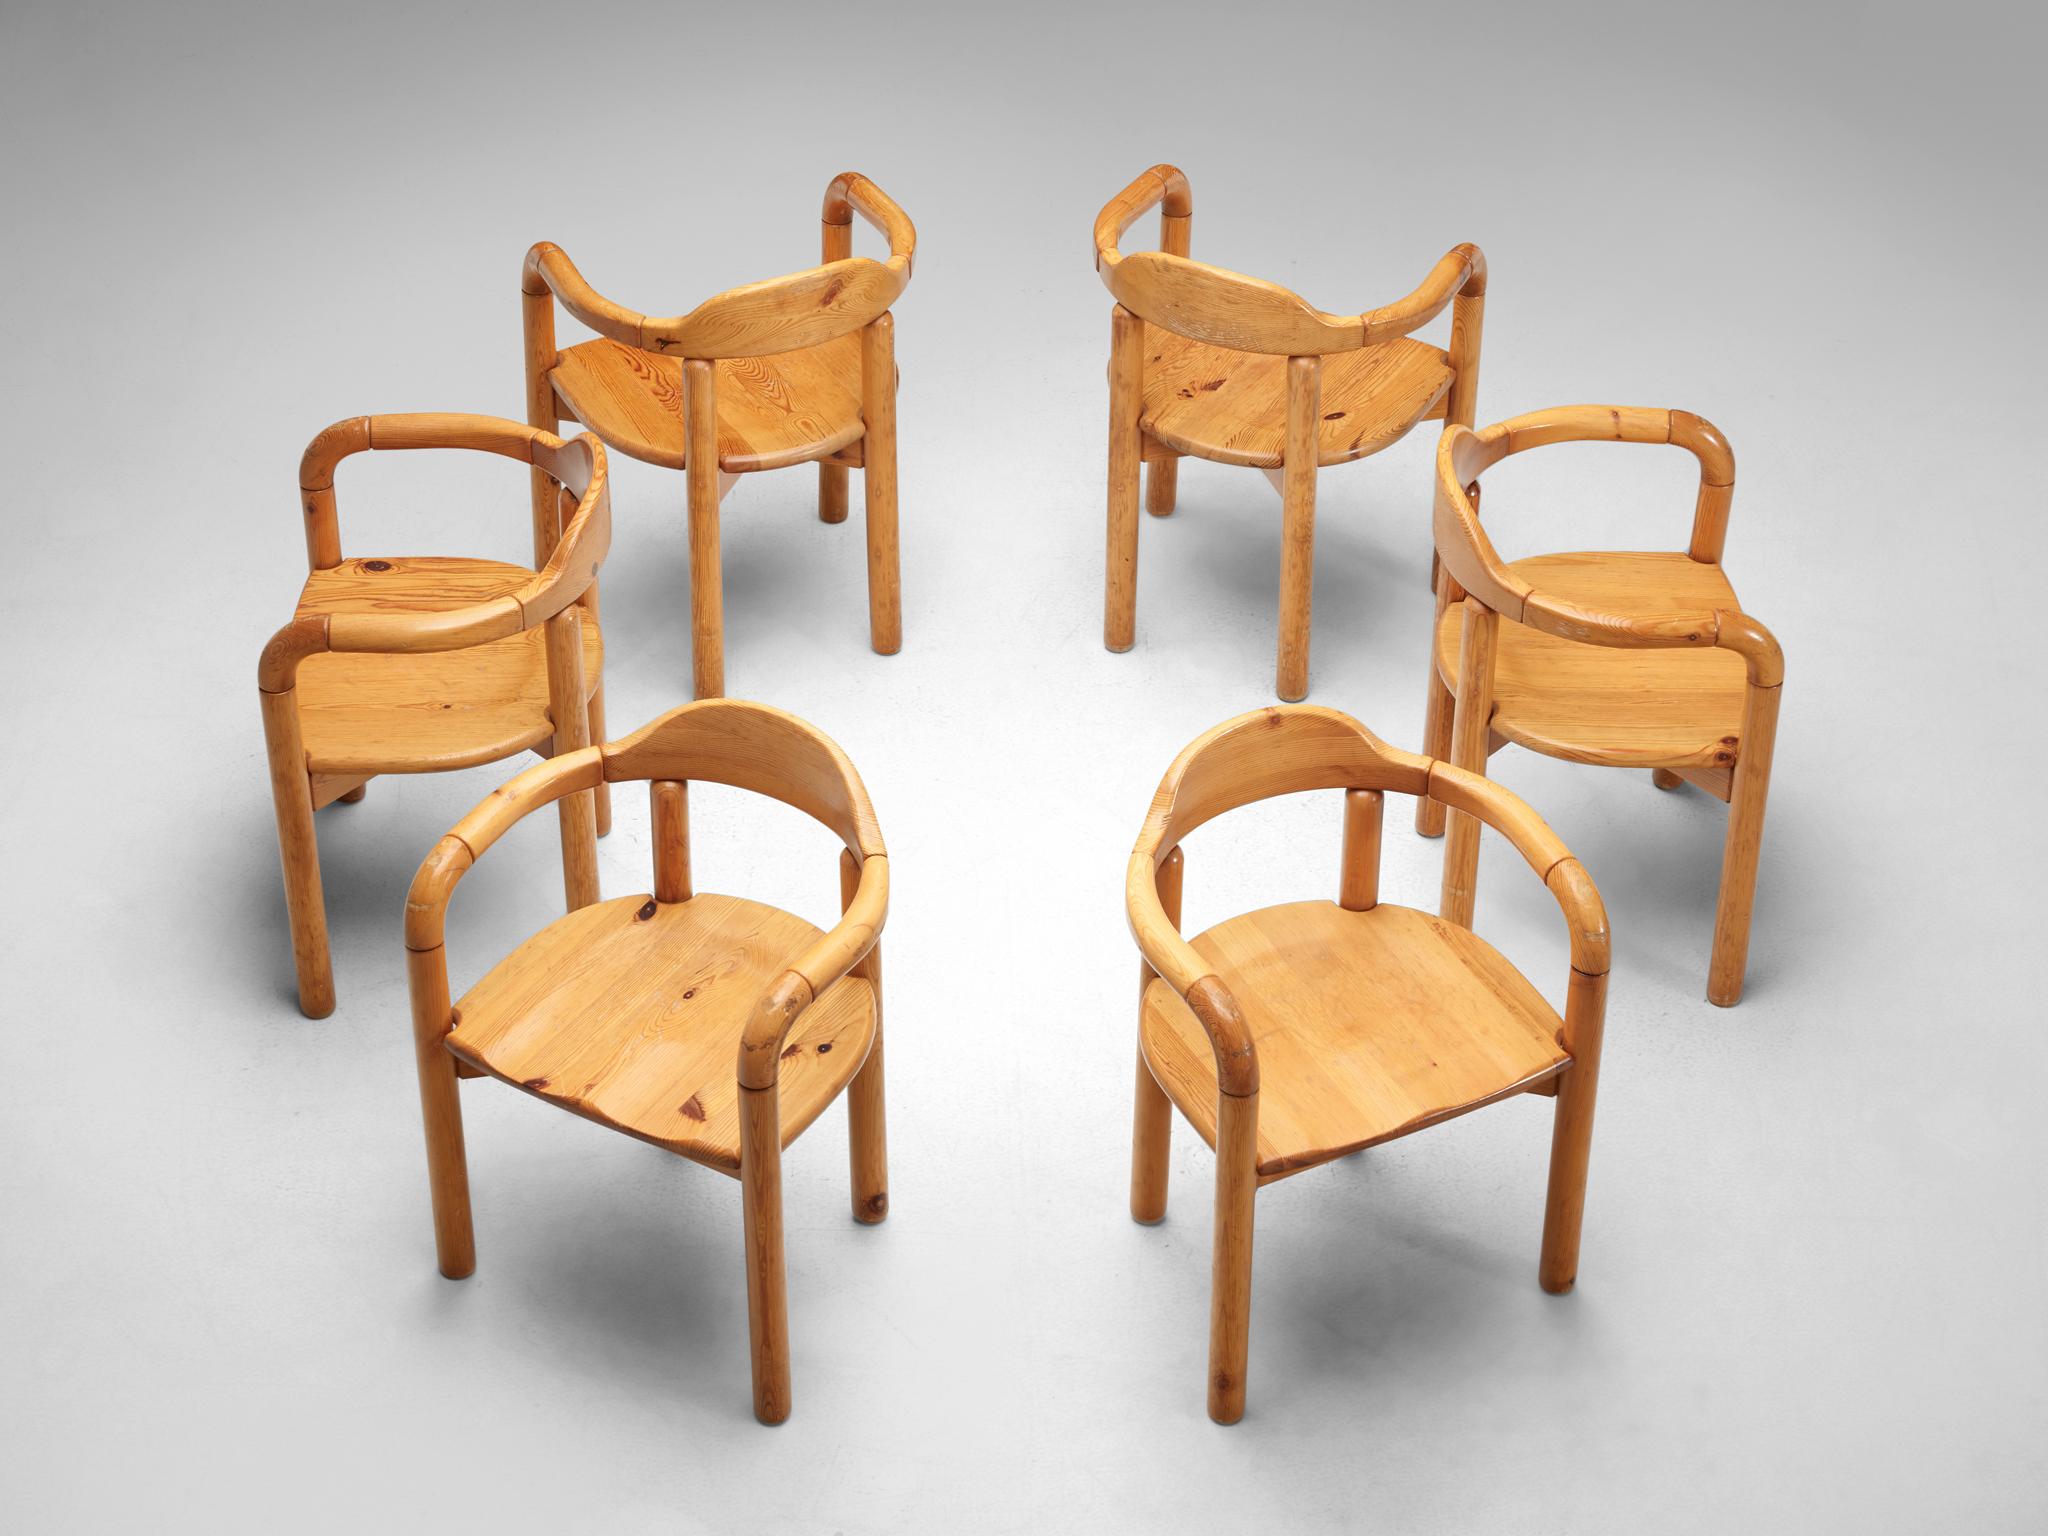 Rainer Daumiller for Hirtshals Savvaerk, armchairs, pine, Denmark, 1970s.

Beautiful set of six organic and natural armchairs in solid pine. A simplistic design with a round seating and full attention for the natural expression and grain of the